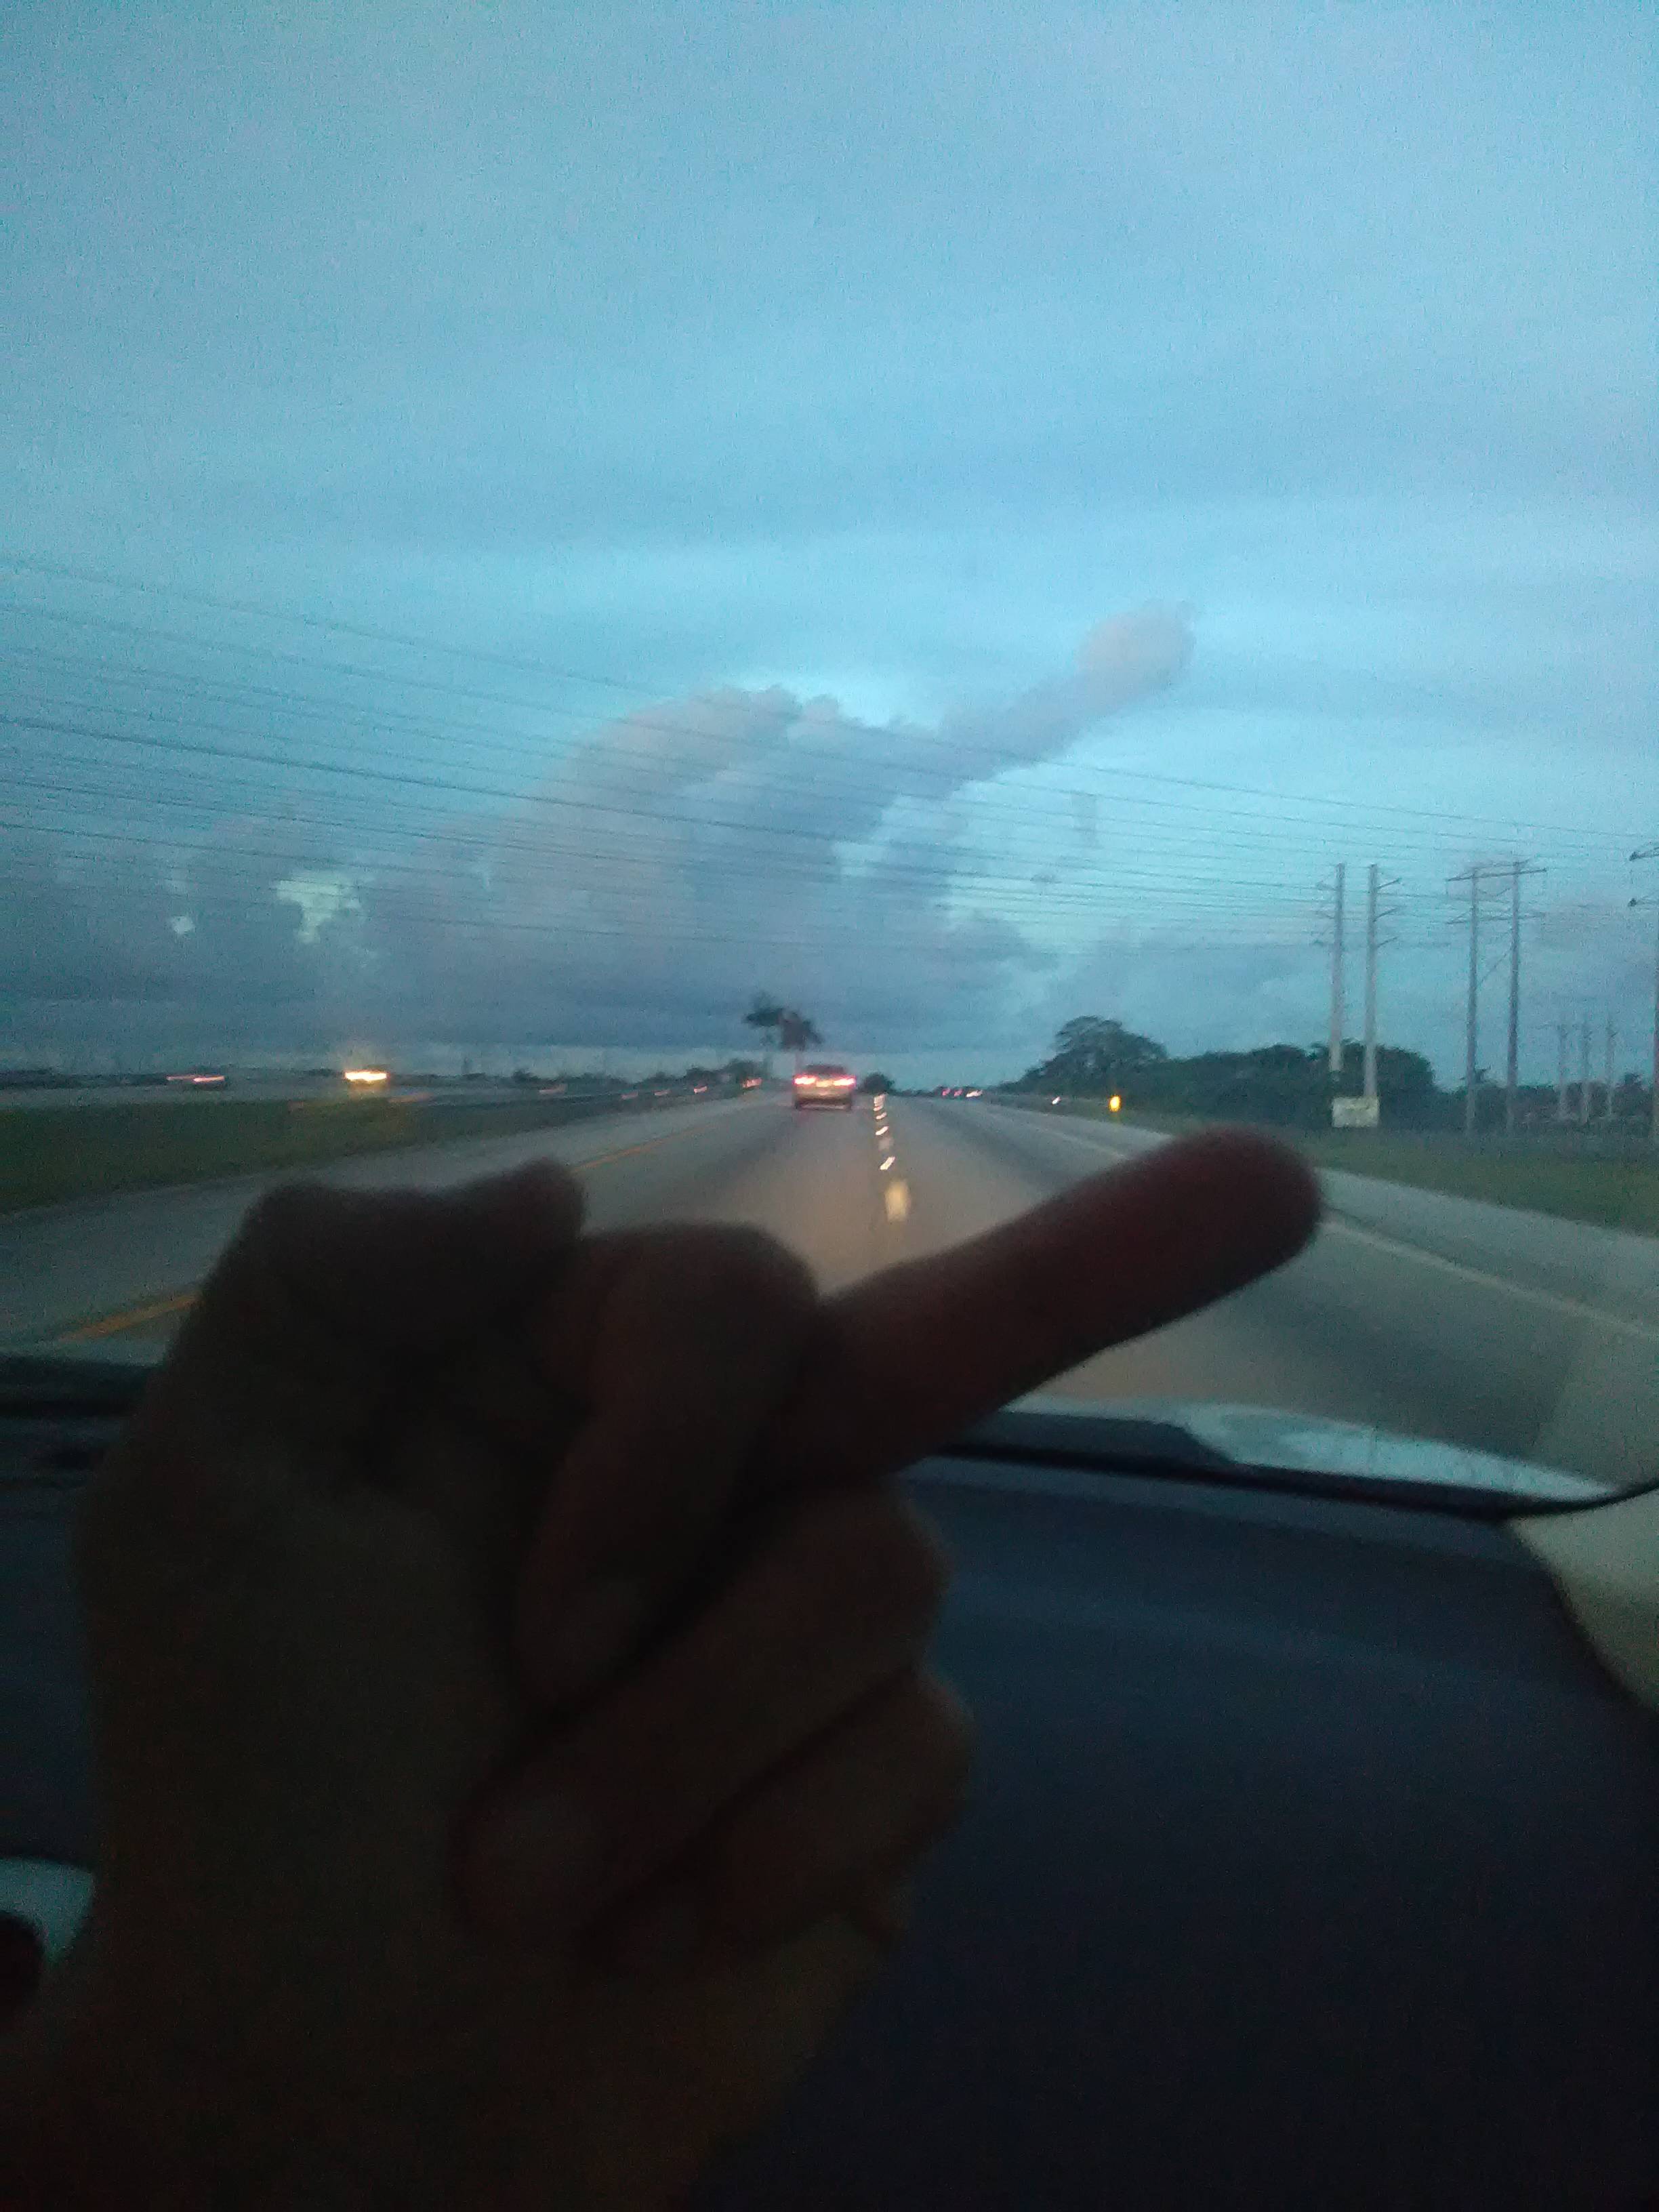 Flipped off on the highway.